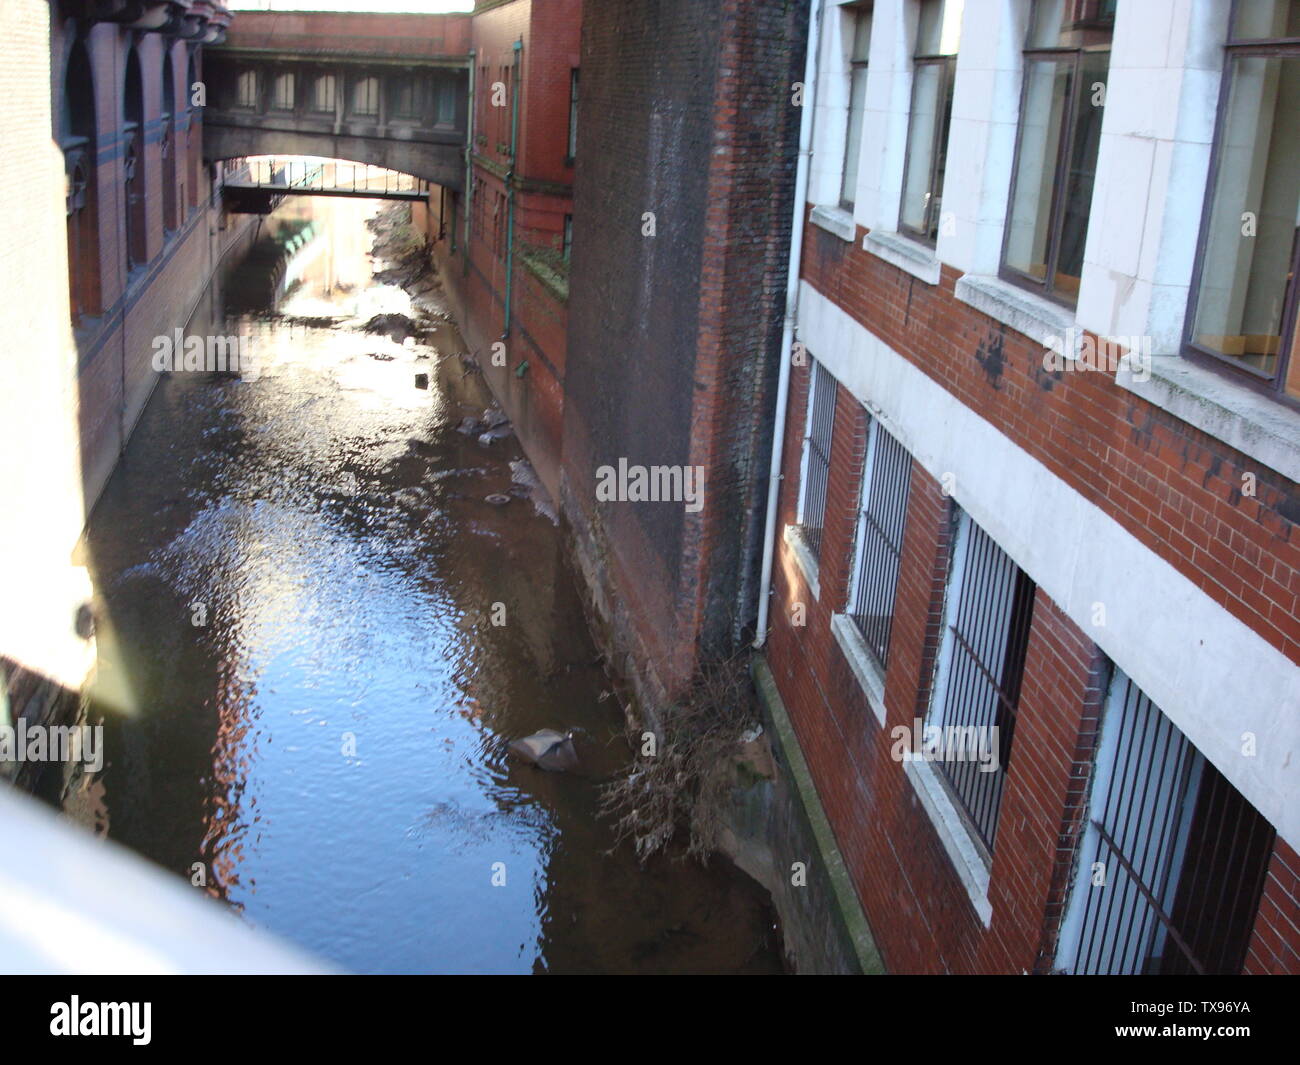 River Medk running under Oxford Road/Oxford Street, Manchester. S Knights, my photo, 10 Feb 2008; 11 February 2008 (original upload date); Own workTransferred from en.pedia; SuzanneKn at en.pedia; Stock Photo